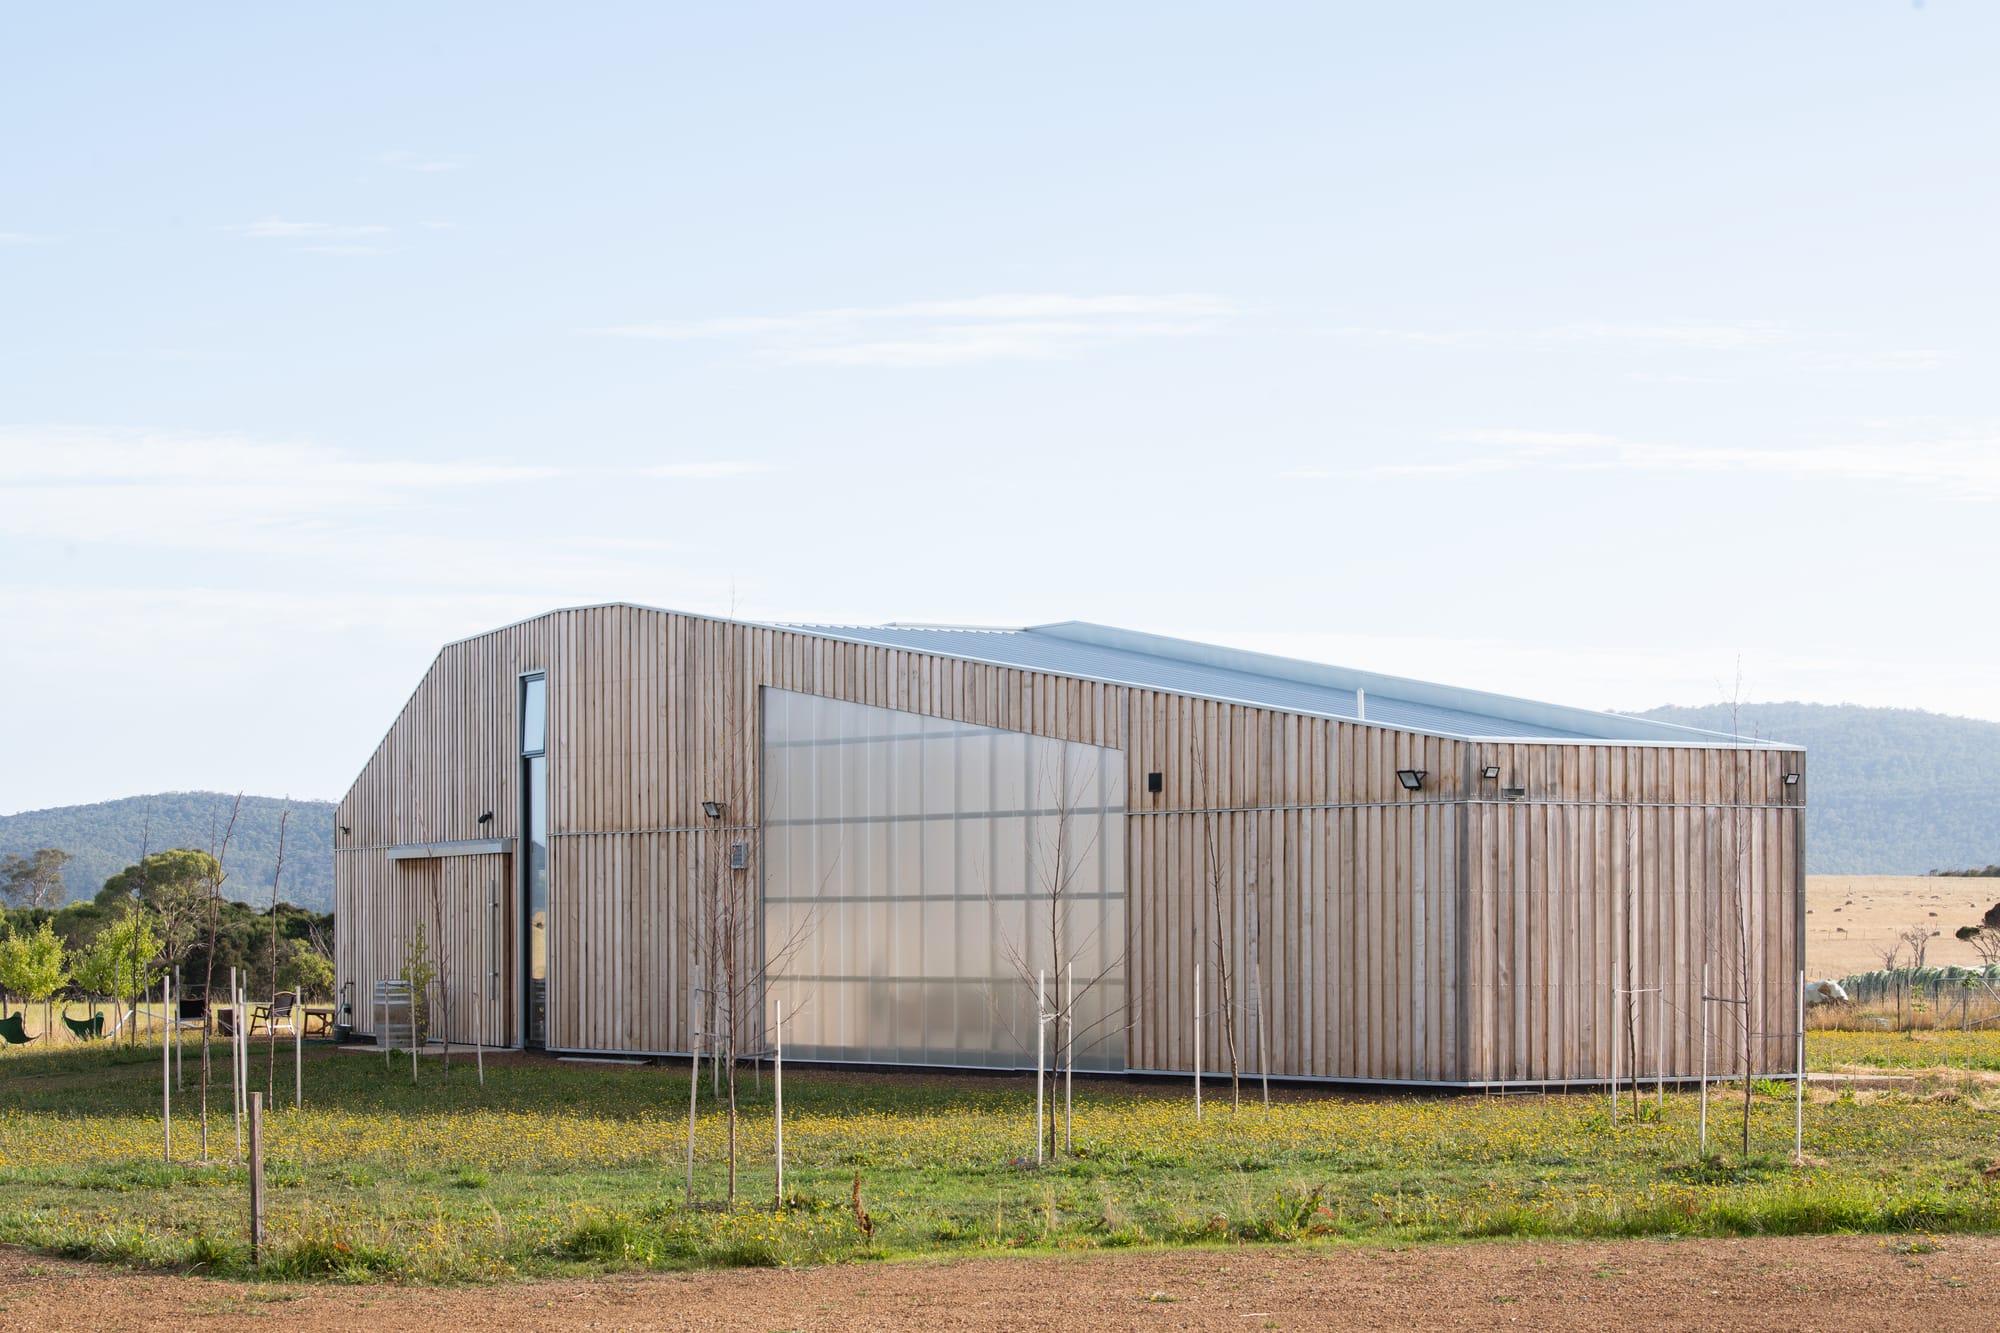 Tasmanian Timber Series: Westella Vineyard.A contemporary winery building at Westella Vineyard with a curved corrugated metal roof and vertical timber siding, standing in a pastoral setting with a mountain backdrop.